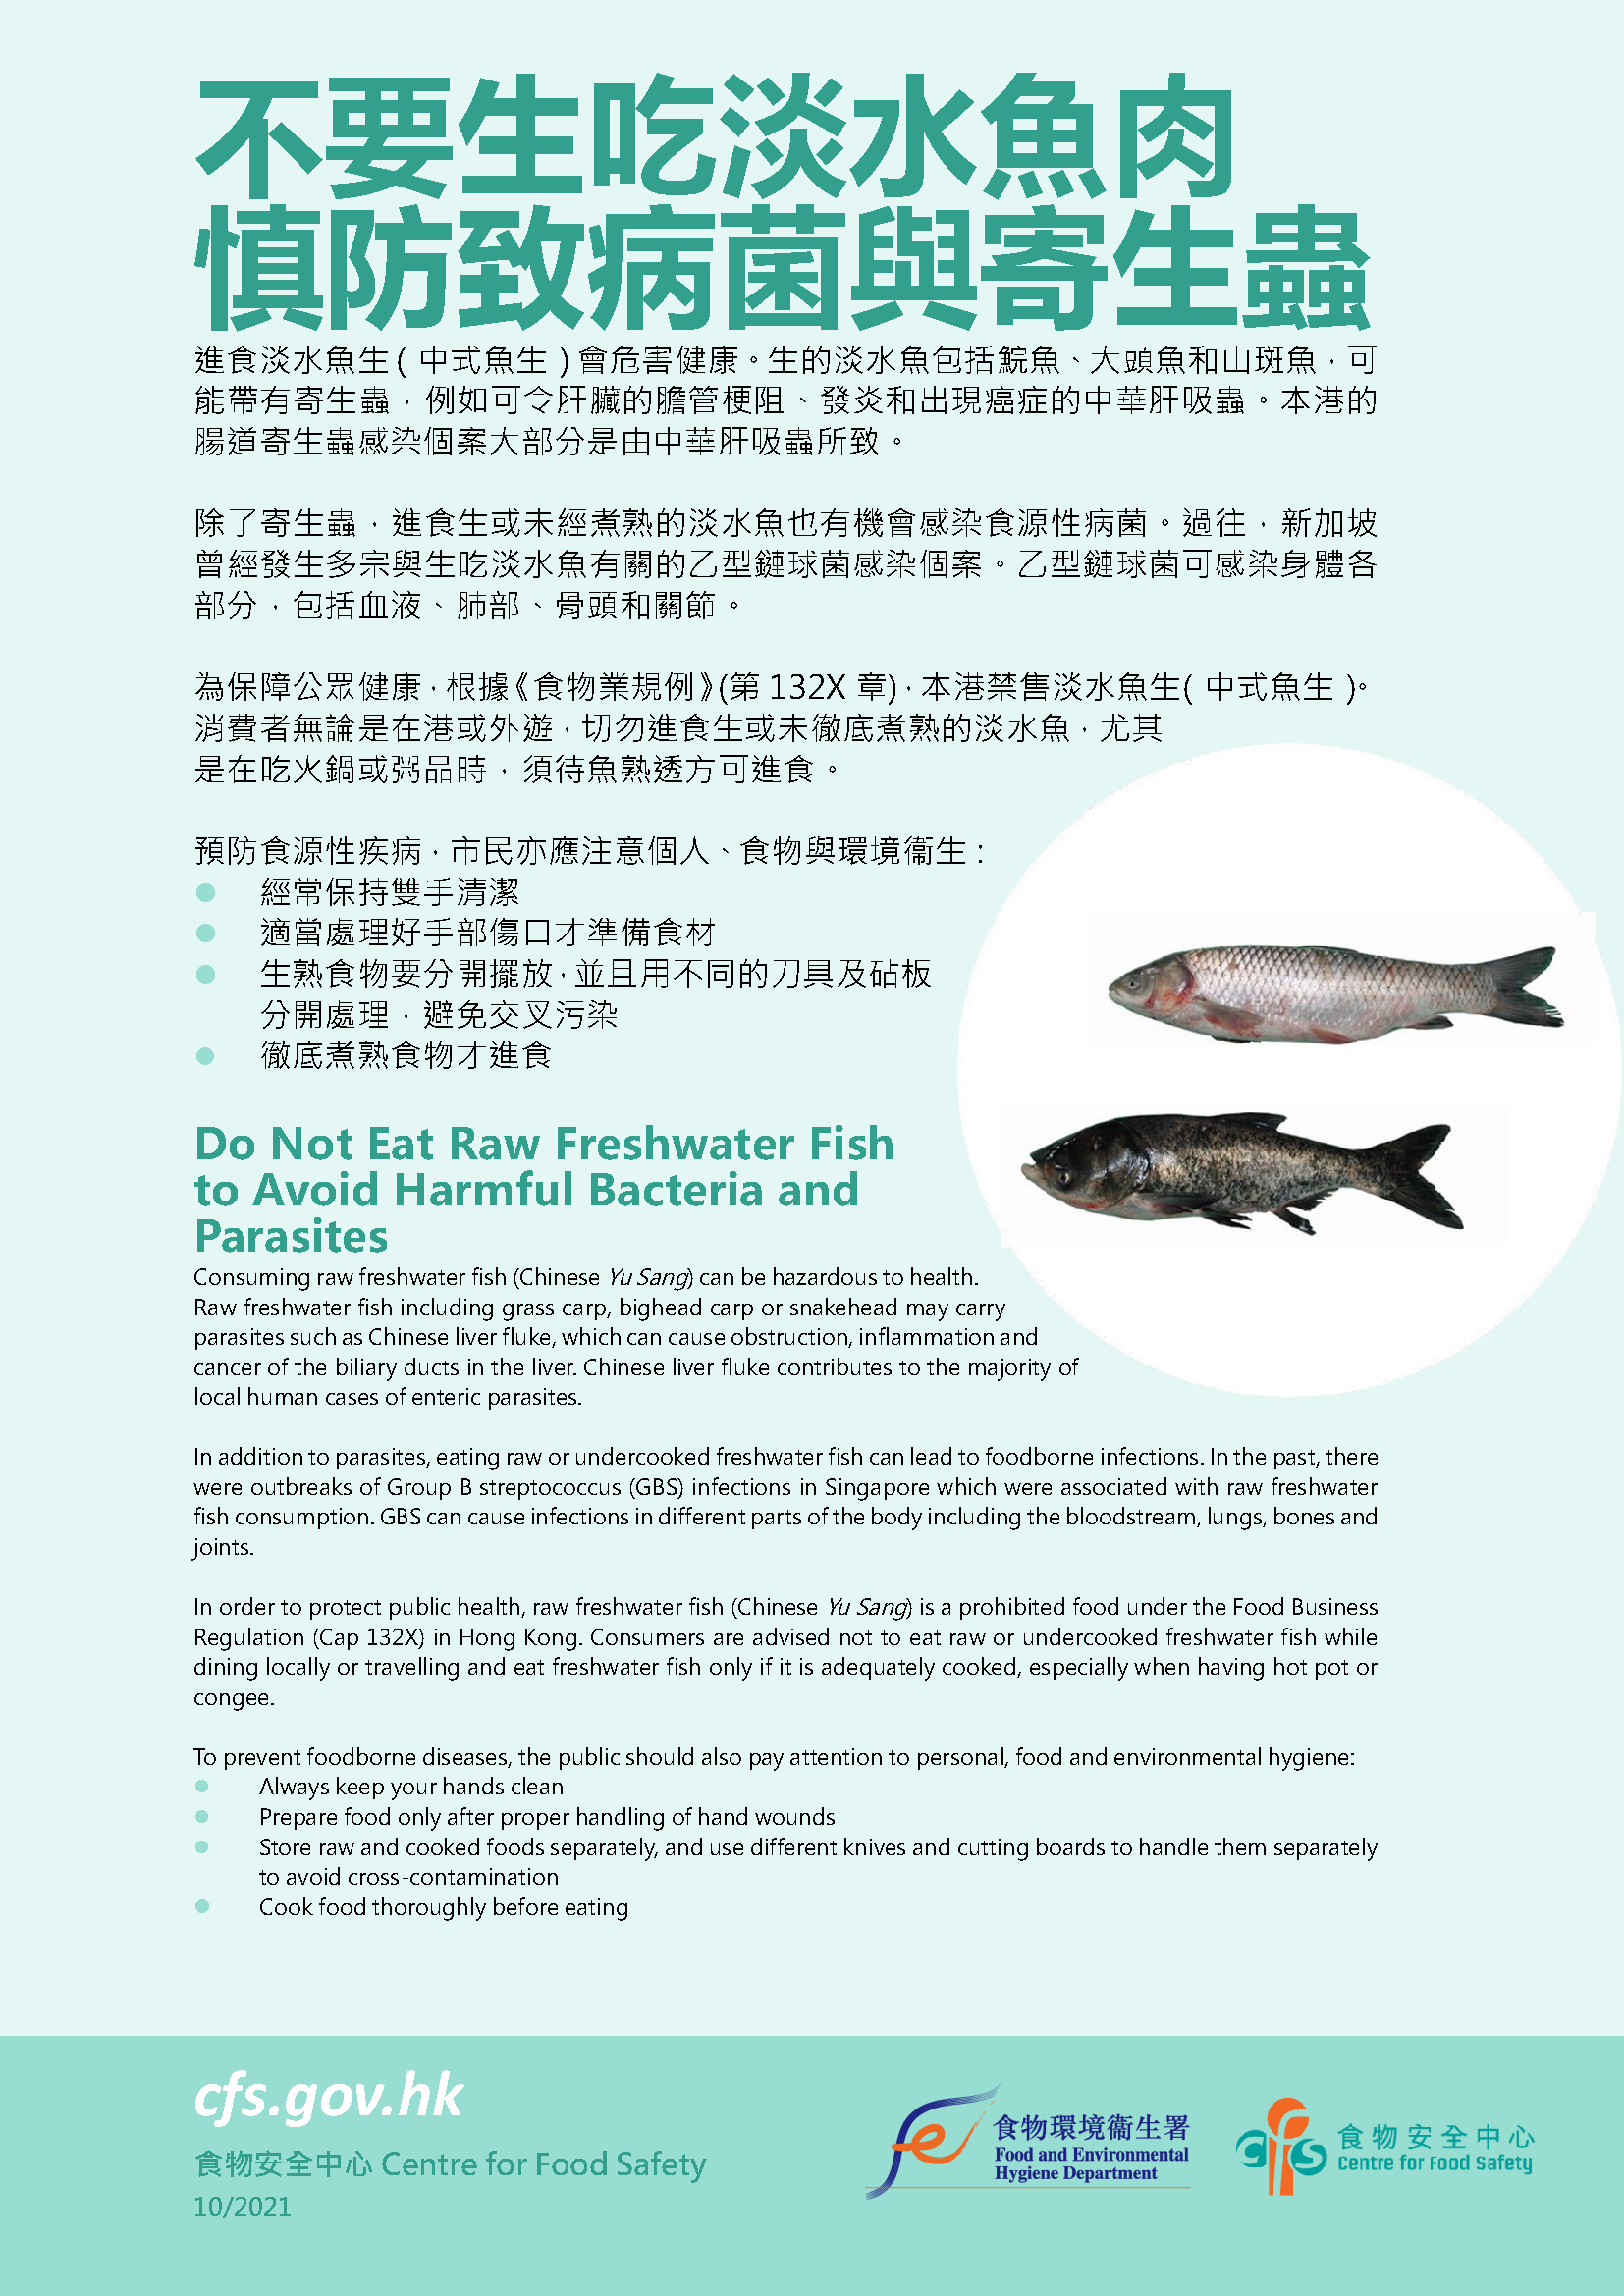 Do Not Eat Raw Freshwater Fish to Avoid Harmful Bacteria and Parasites